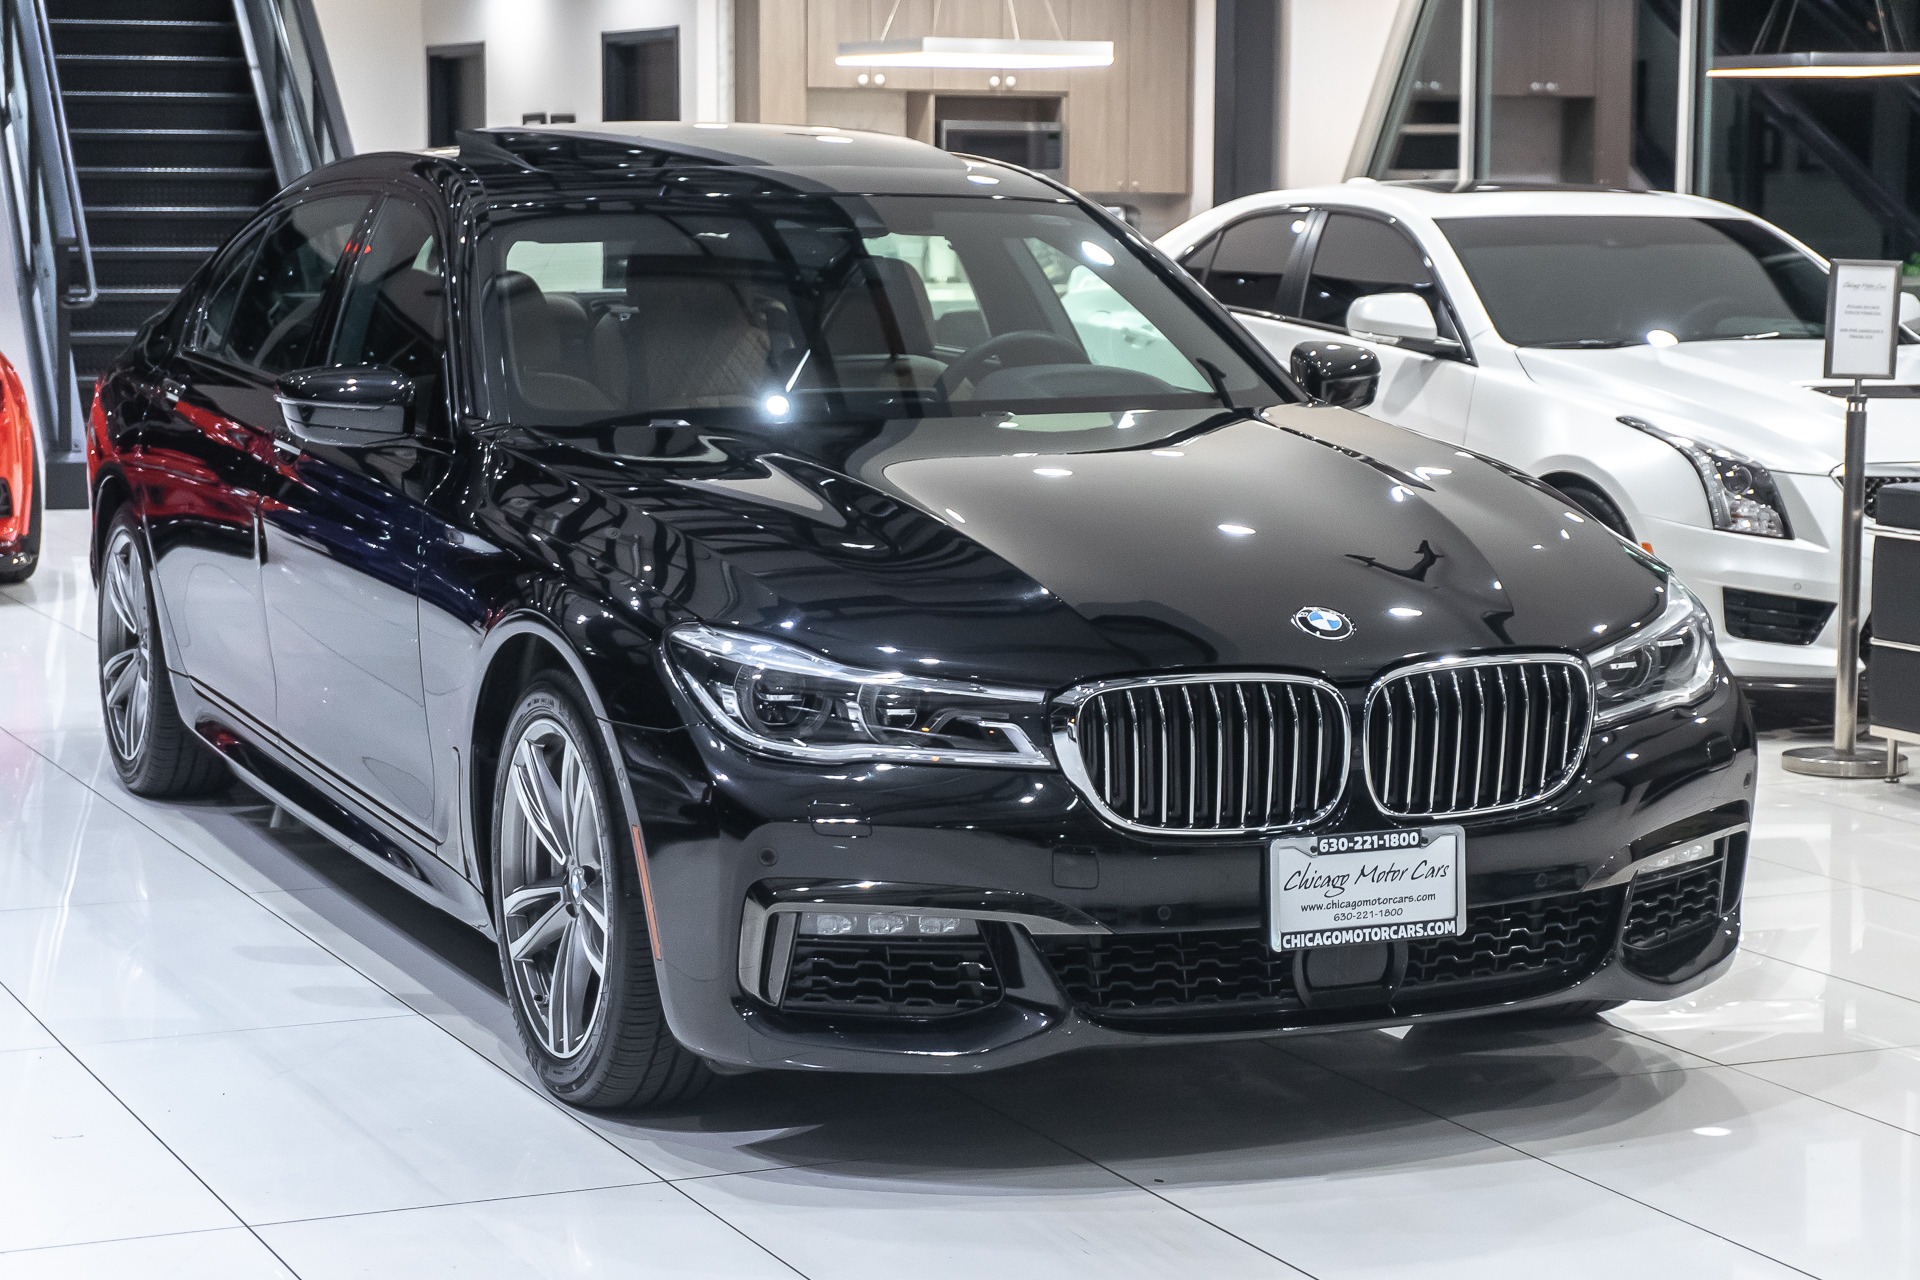 Used 2018 BMW 750i xDrive M-Sport + Autobahn Pkg MSRP $130k+ For Sale  (Special Pricing) | Chicago Motor Cars Stock #16177